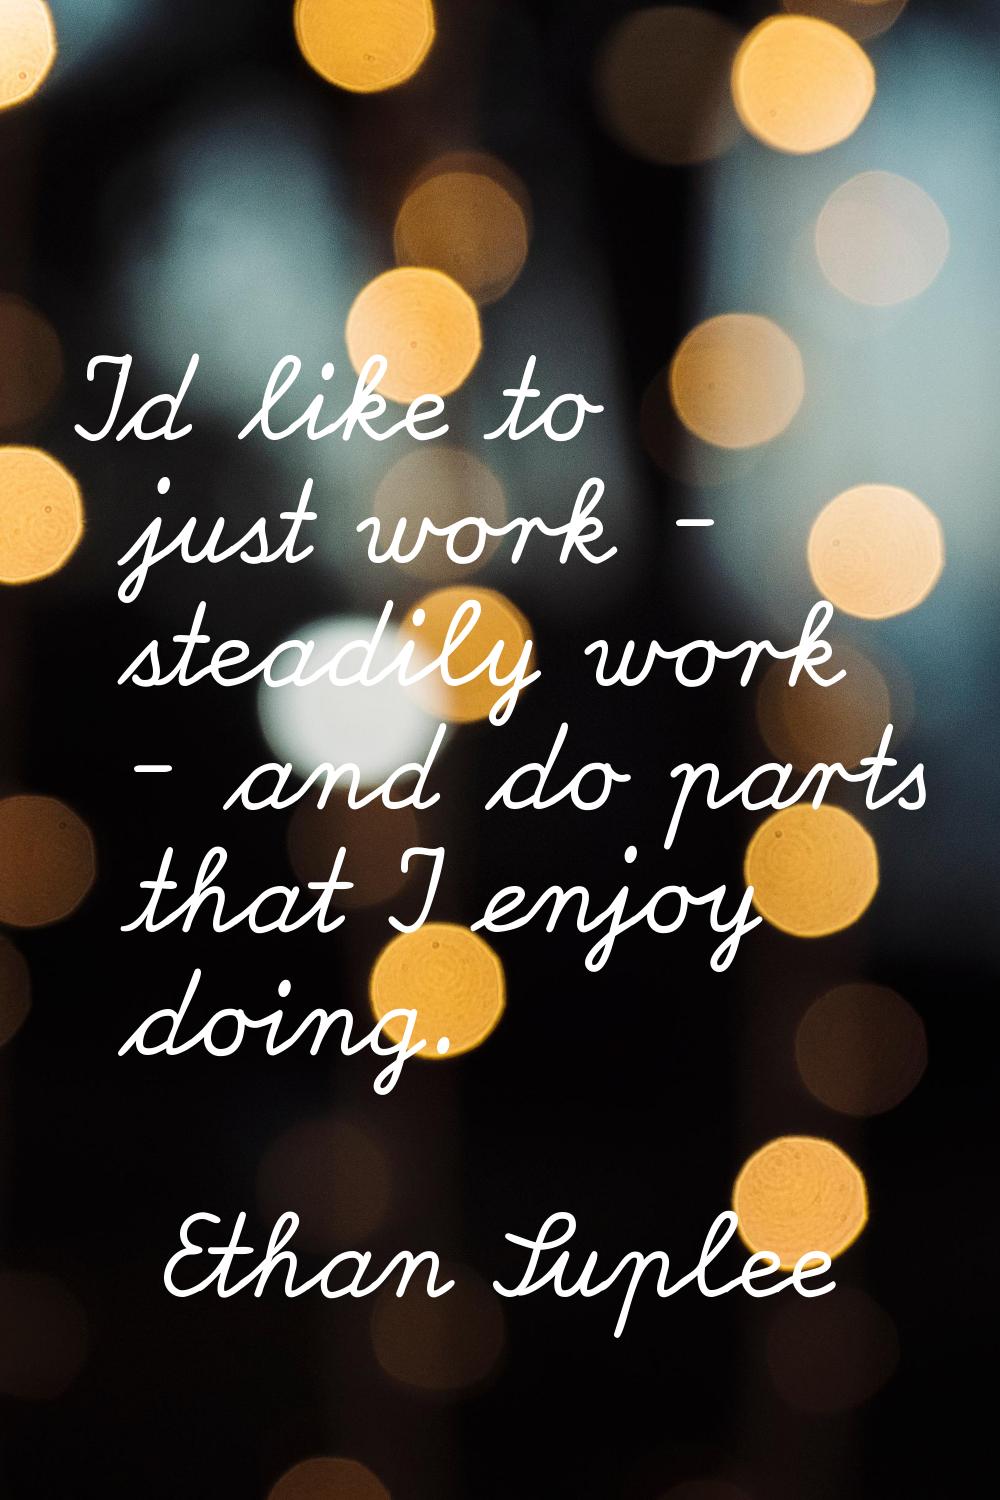 I'd like to just work - steadily work - and do parts that I enjoy doing.